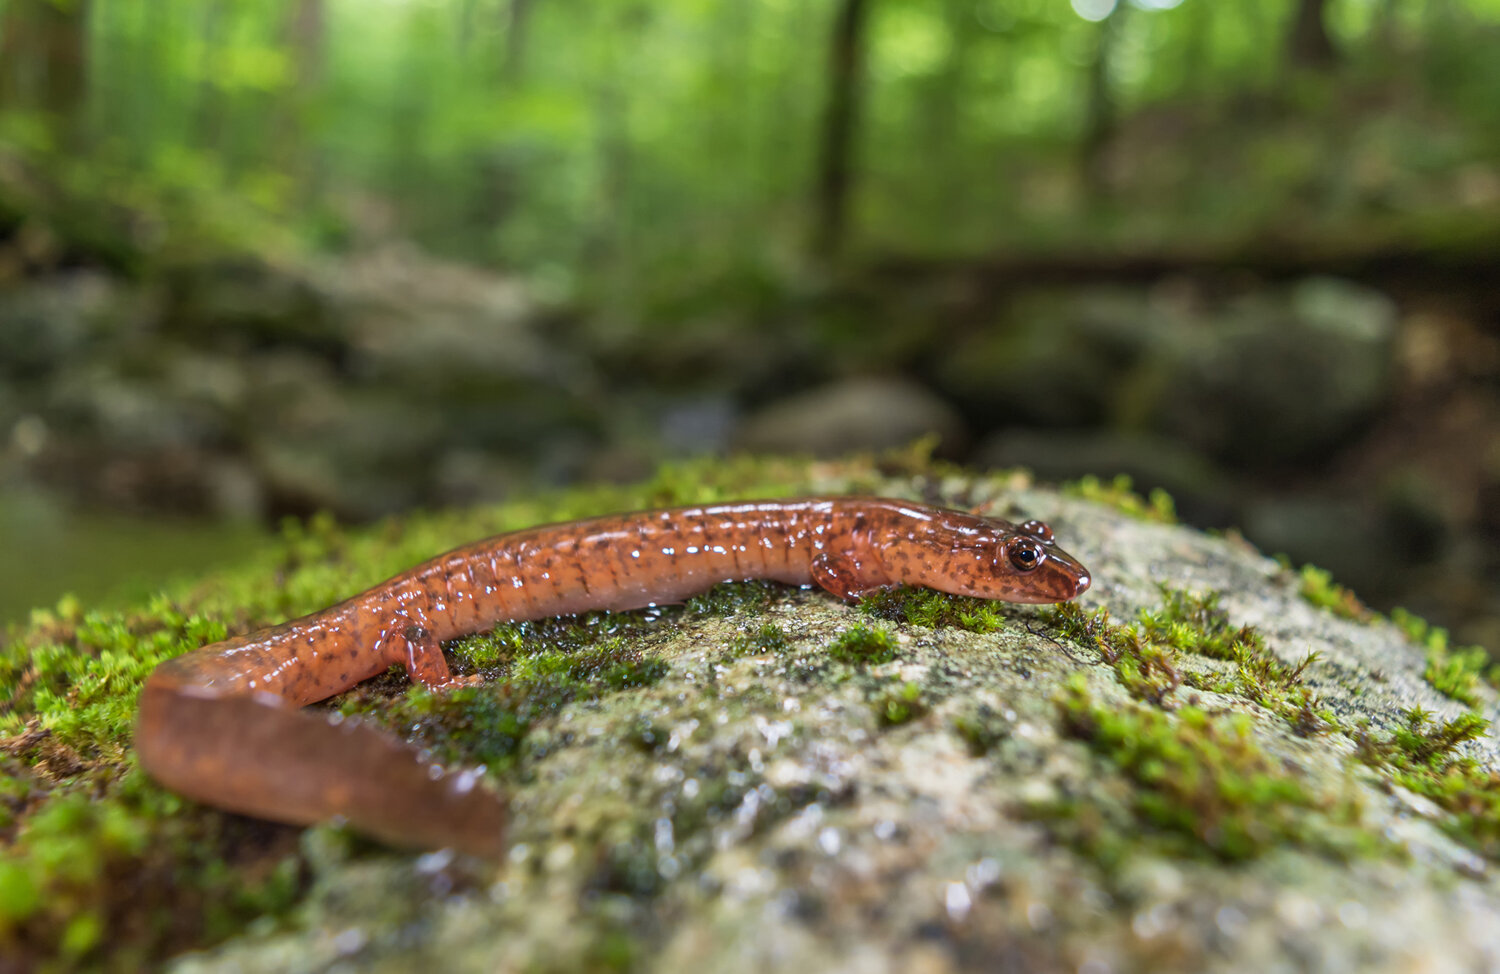 Climate change water variability hurts salamander populations - Phys.org